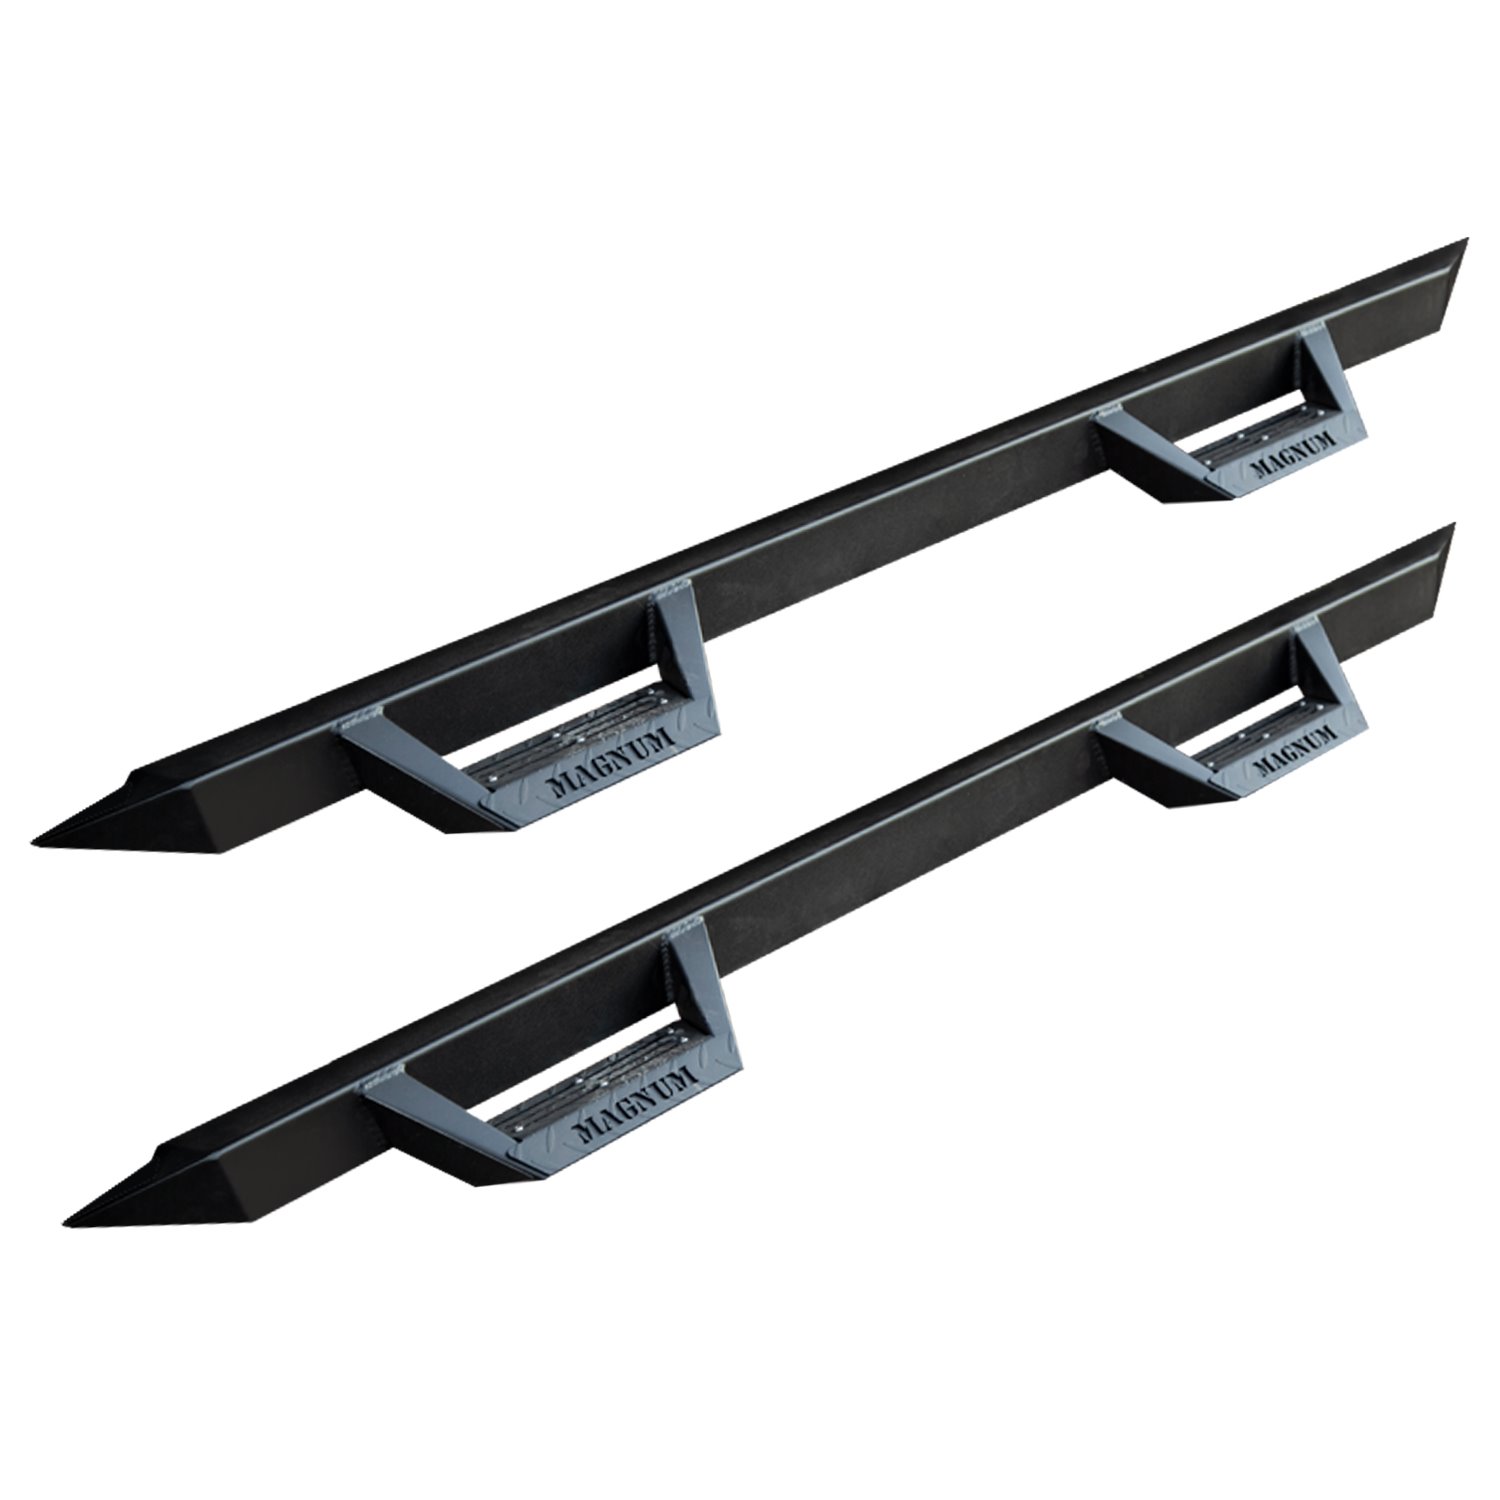 RTS36DG Magnum RT Drop Steps, Black Textured Alloy Steel, Fits Select Dodge Ram 1500 New Body Style Quad/Extended Cab